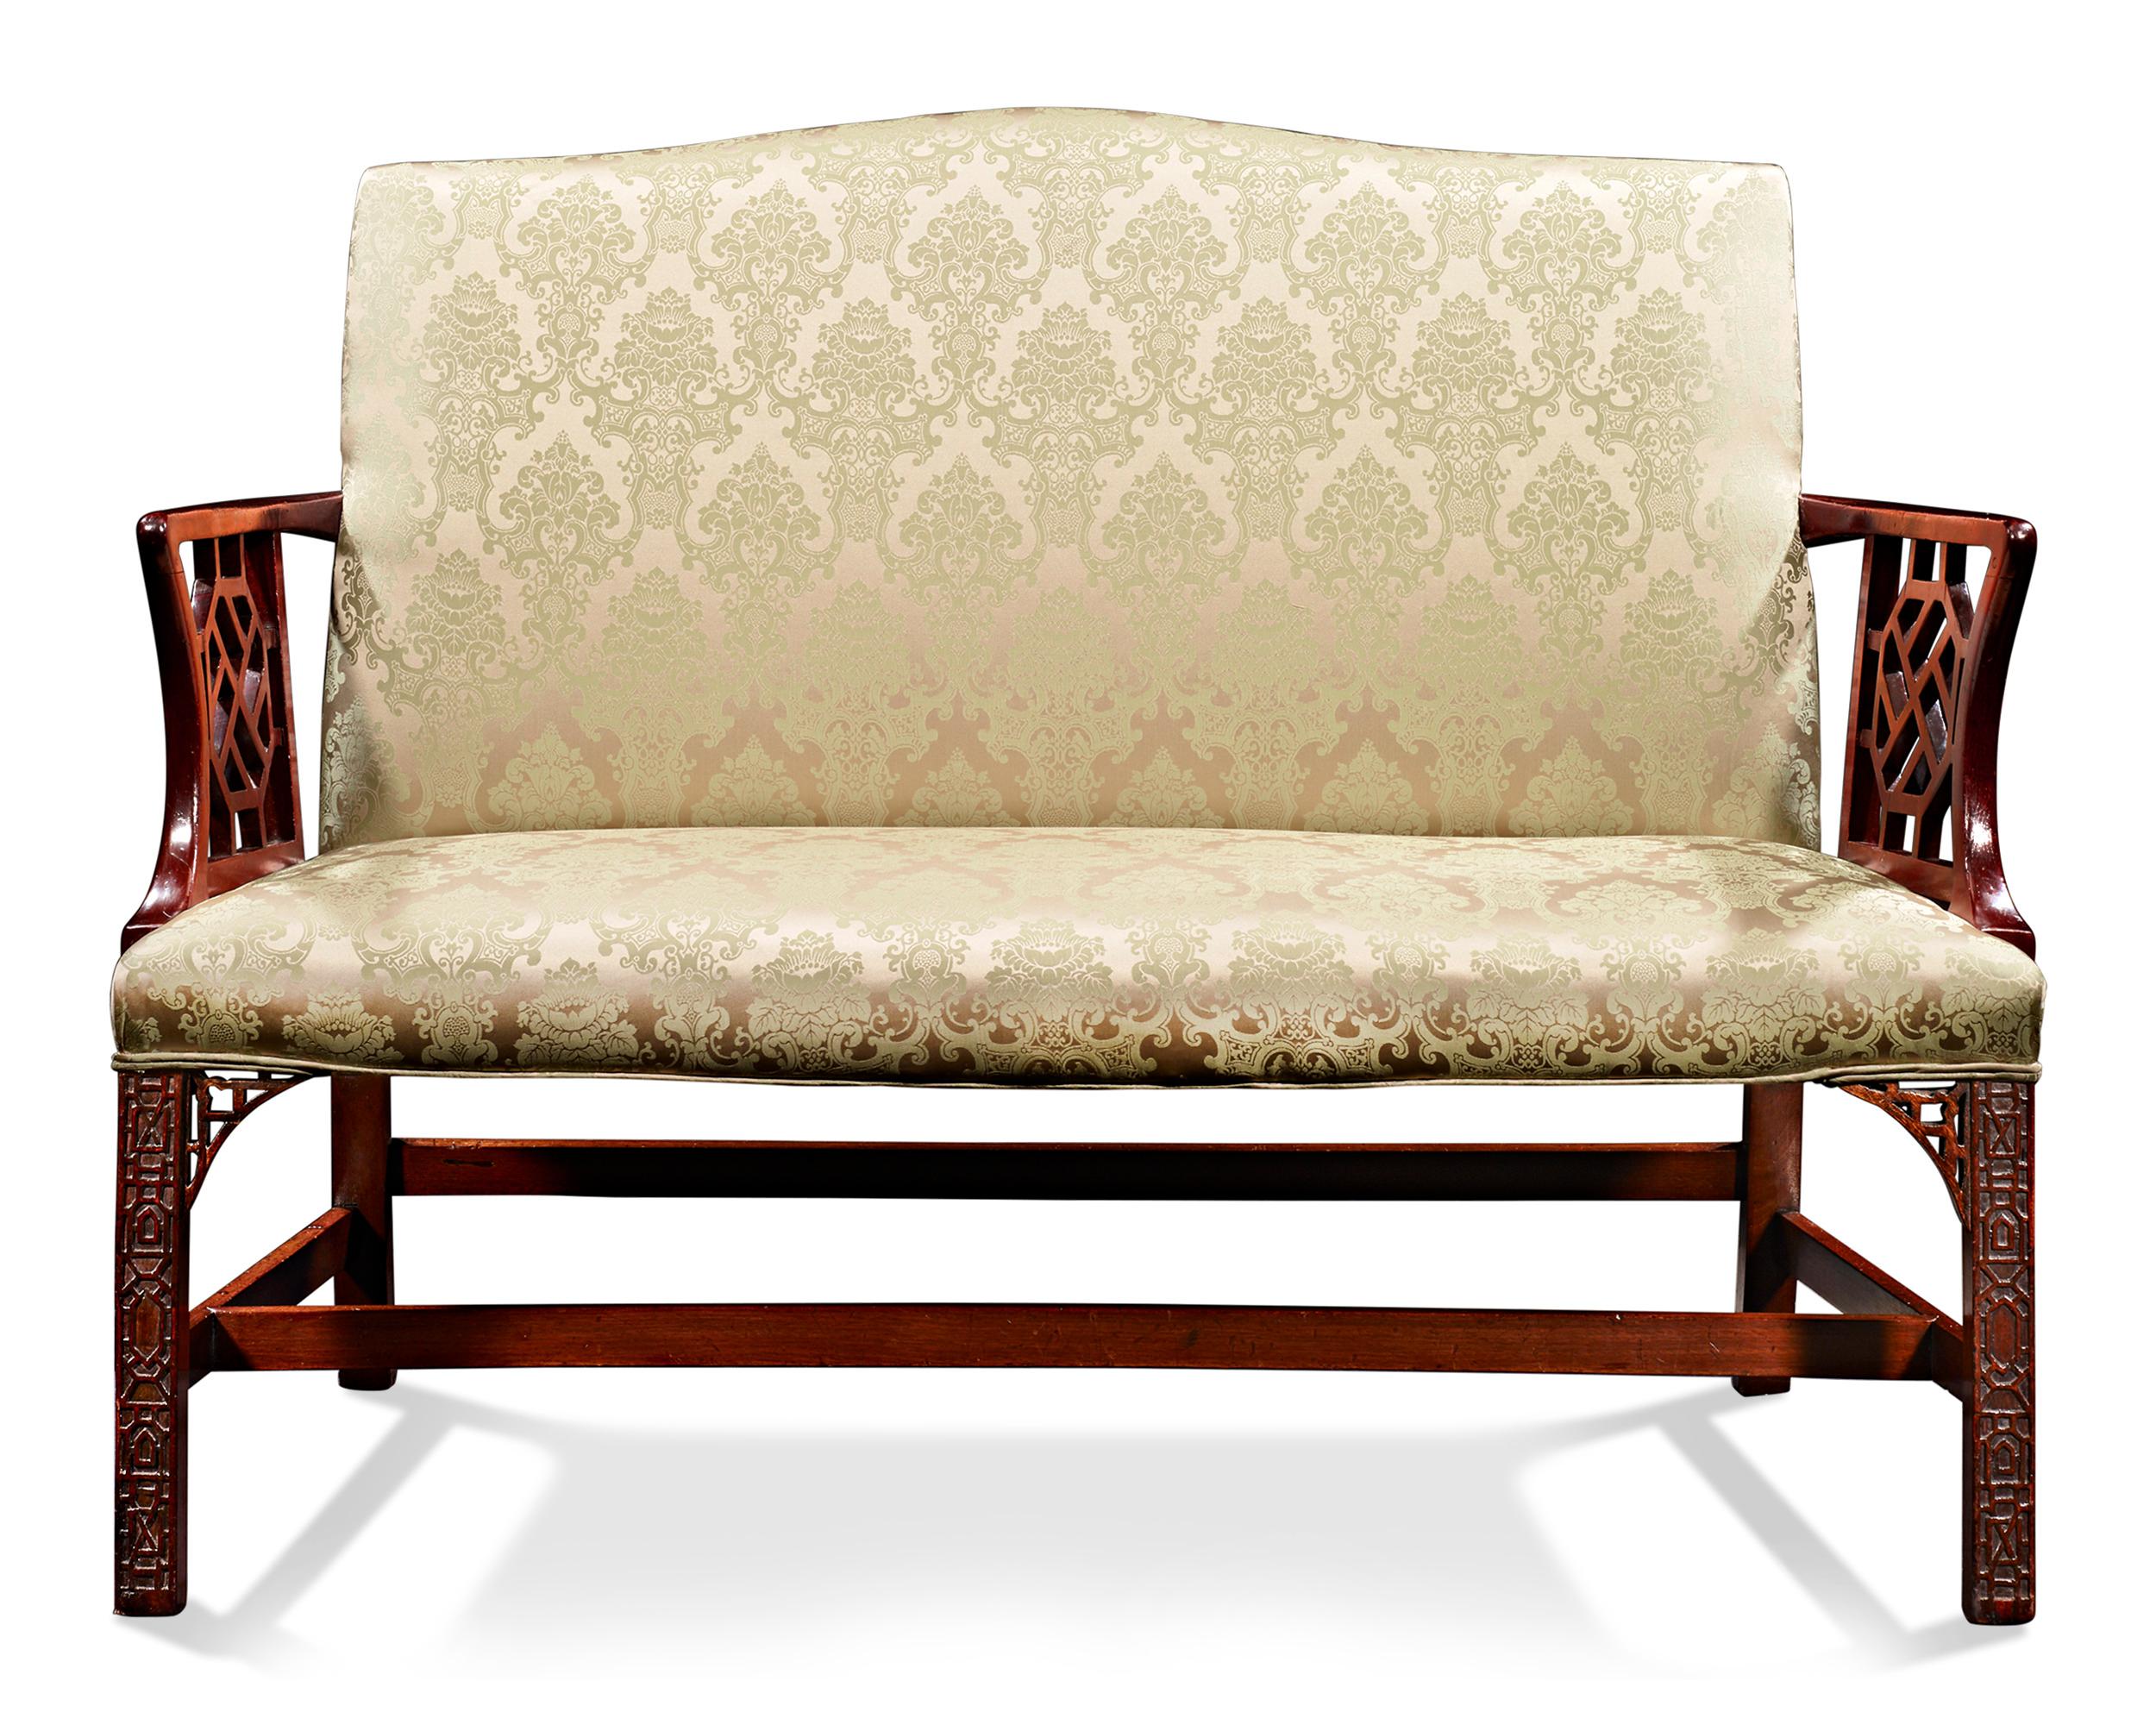 This beautiful George III-era upholstered settee features delicate serpentine lines highlighted by luxurious mahogany. Open trellis arms and square legs carved with Fine blind fretwork are headed by pierced brackets and joined by an H-formed